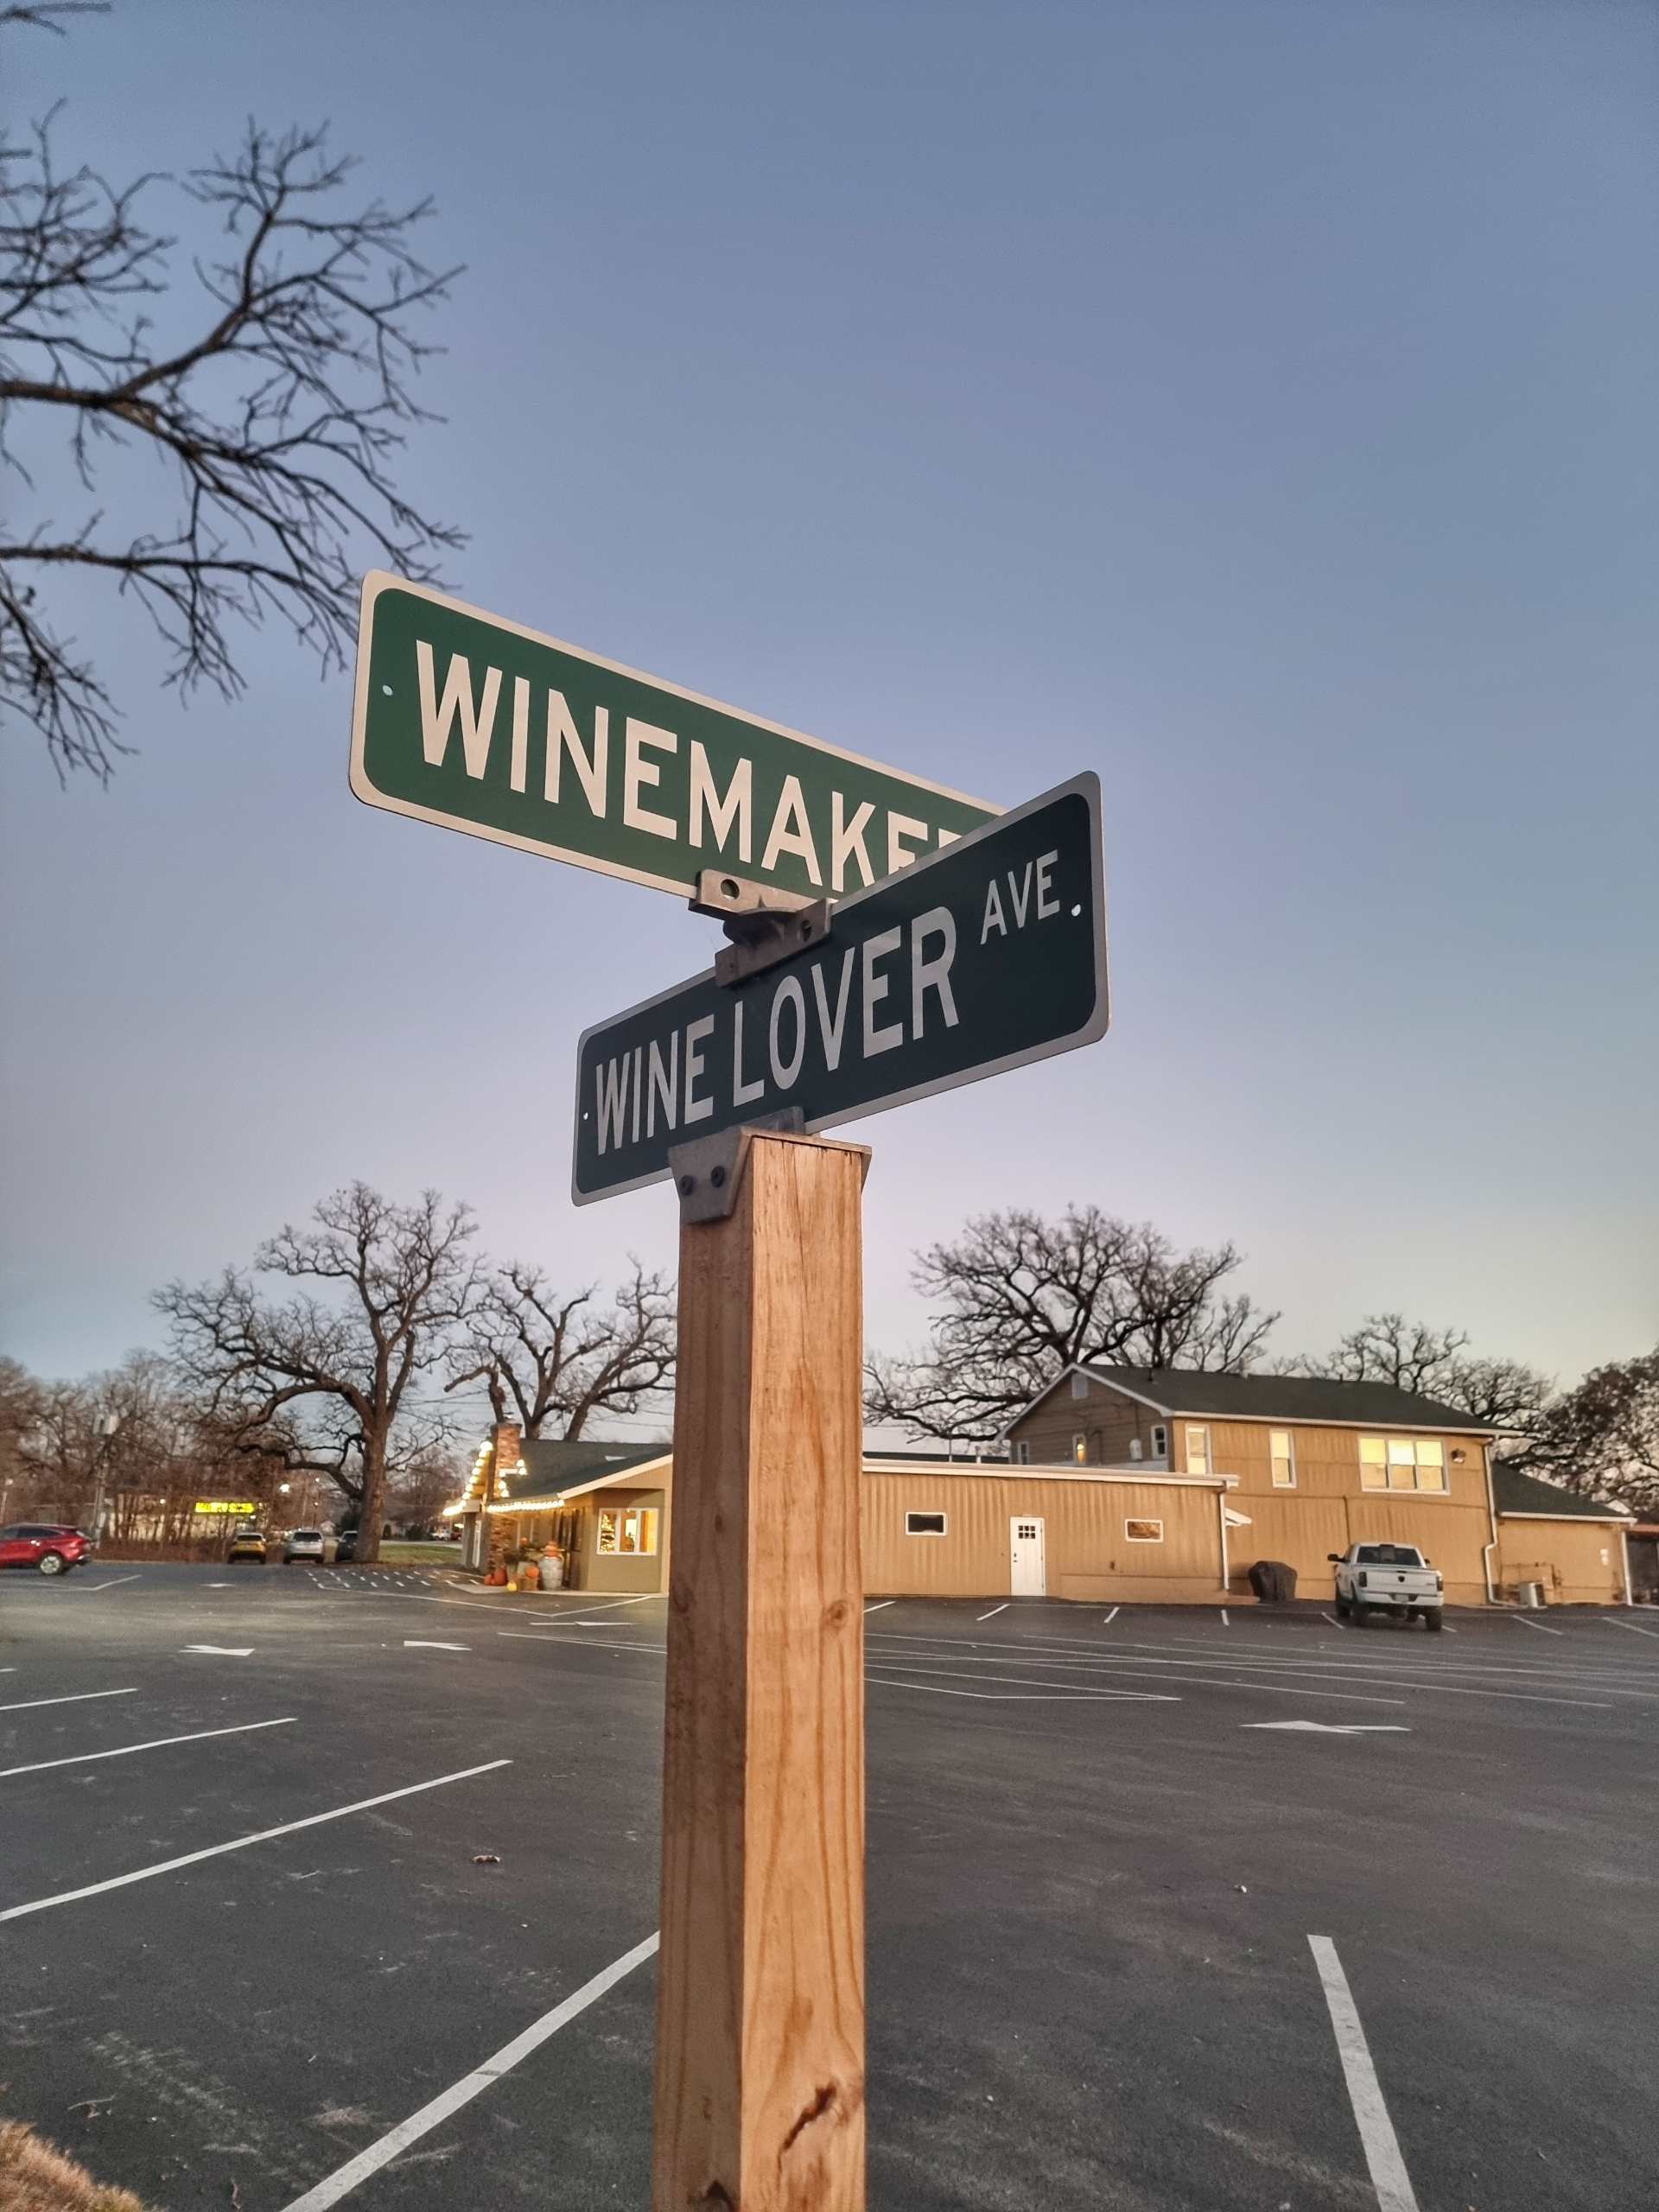 Winelover lane at Old Oaks Winery- featured image